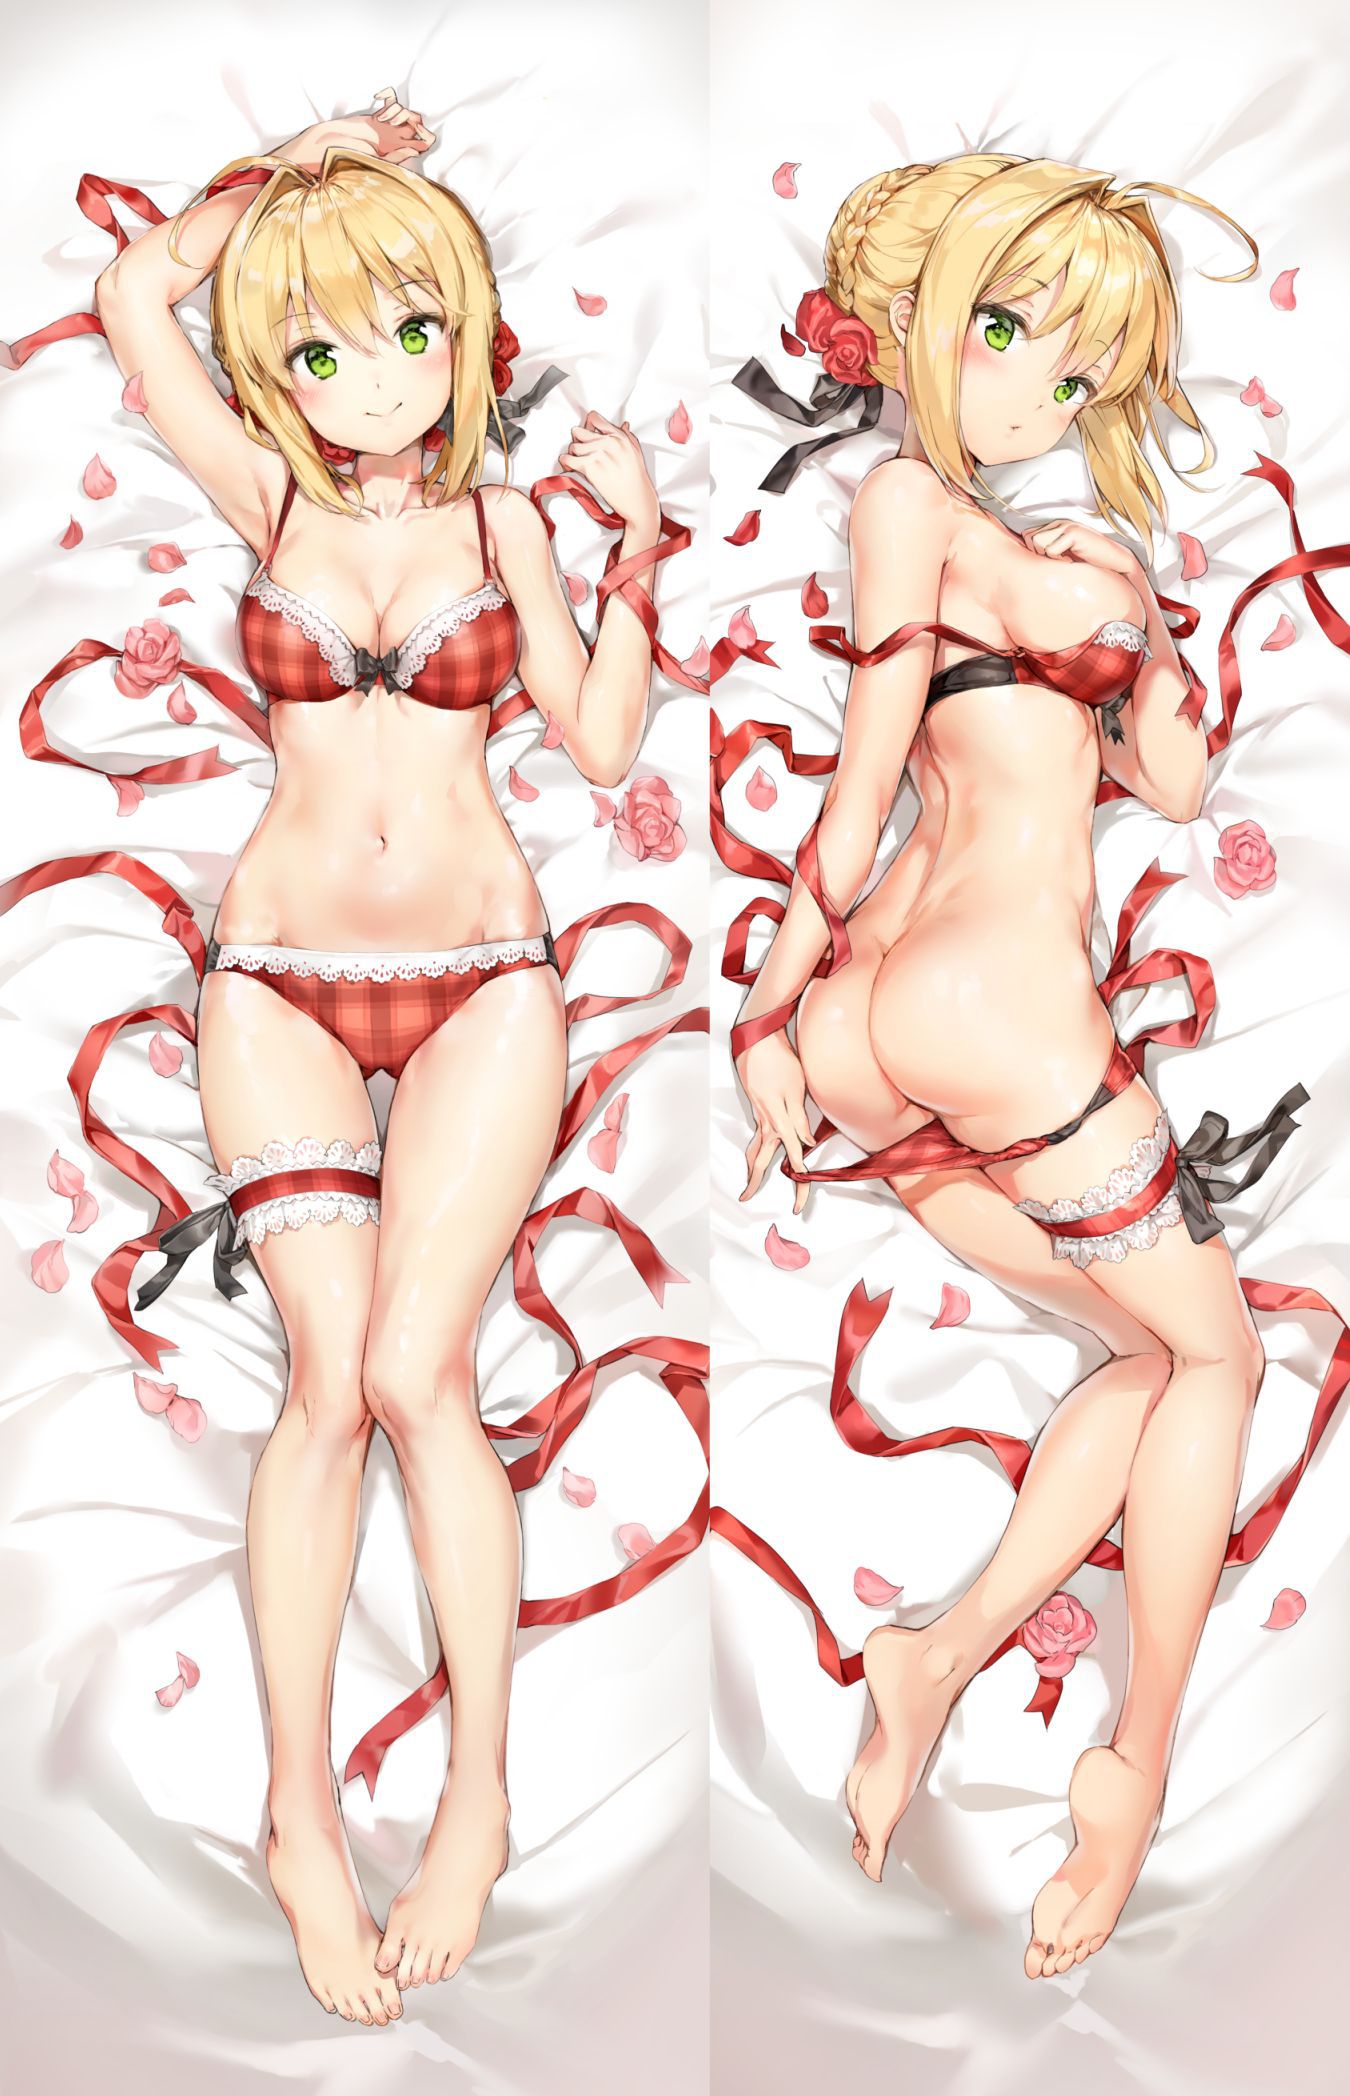 [Secondary ZIP] is about to start anime 100 pieces of cute image summary of Nero Claudius so soon 73